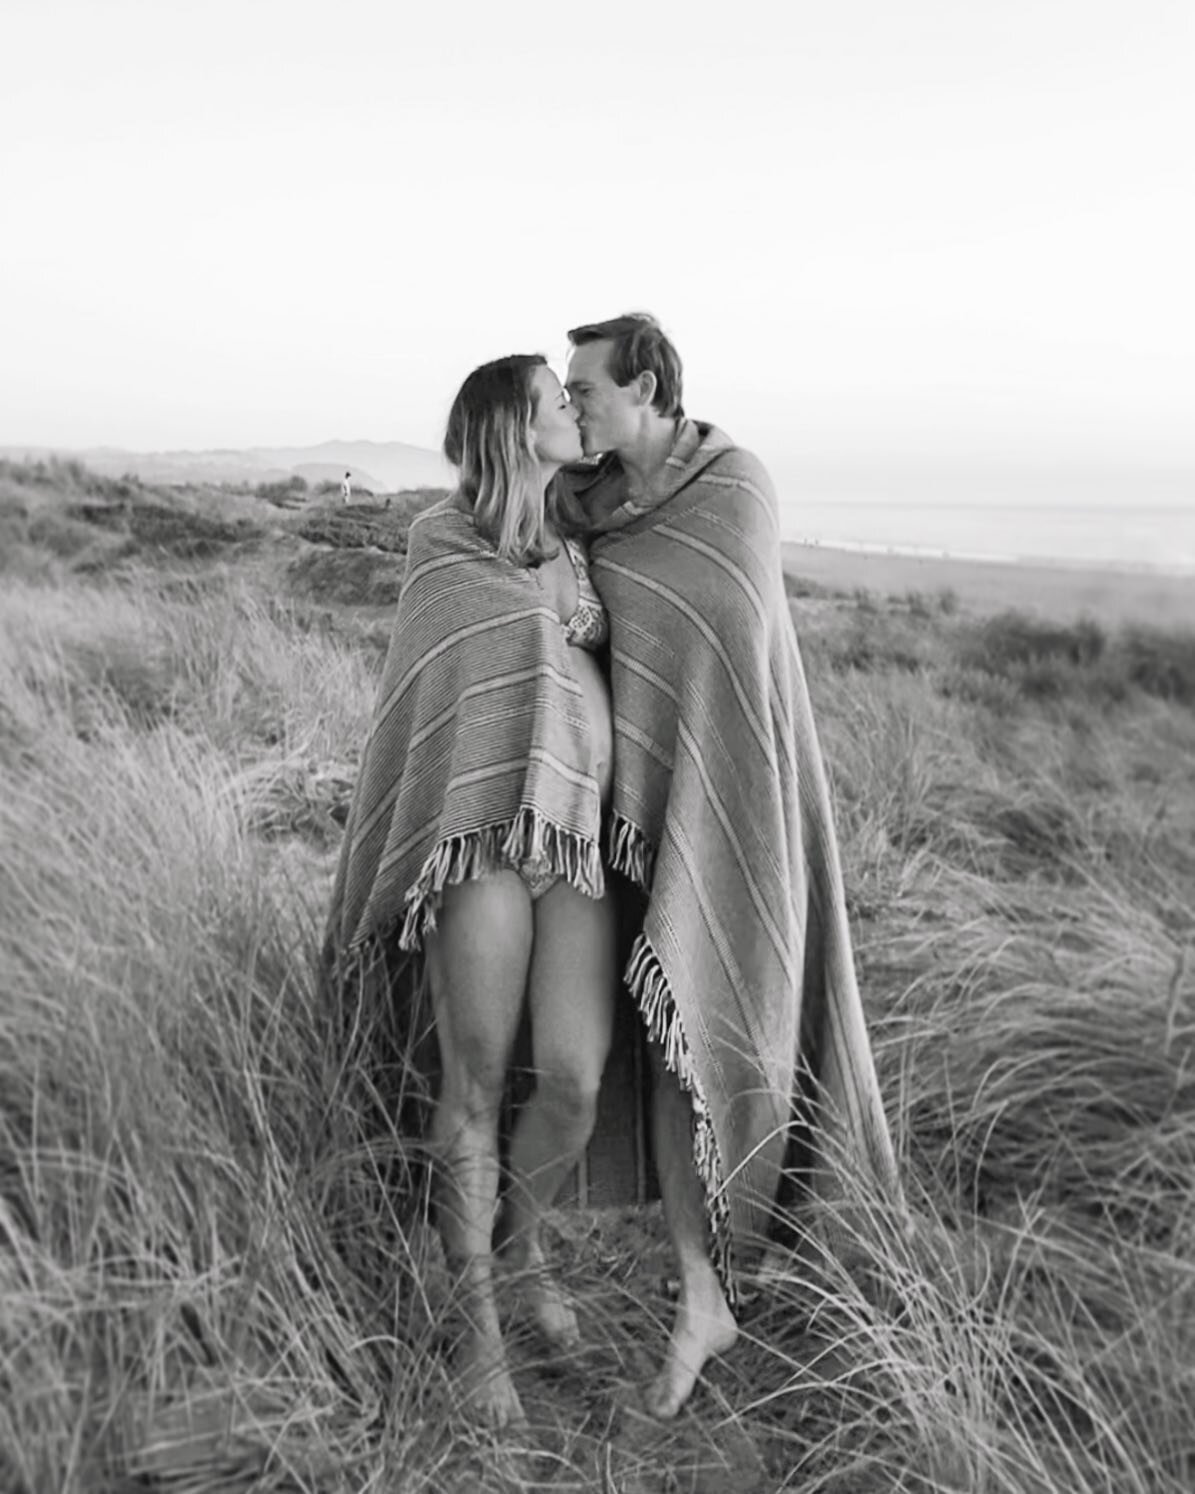 The way we were&hellip; I still find myself swooning over this iPhone snap of these expectant parents. //